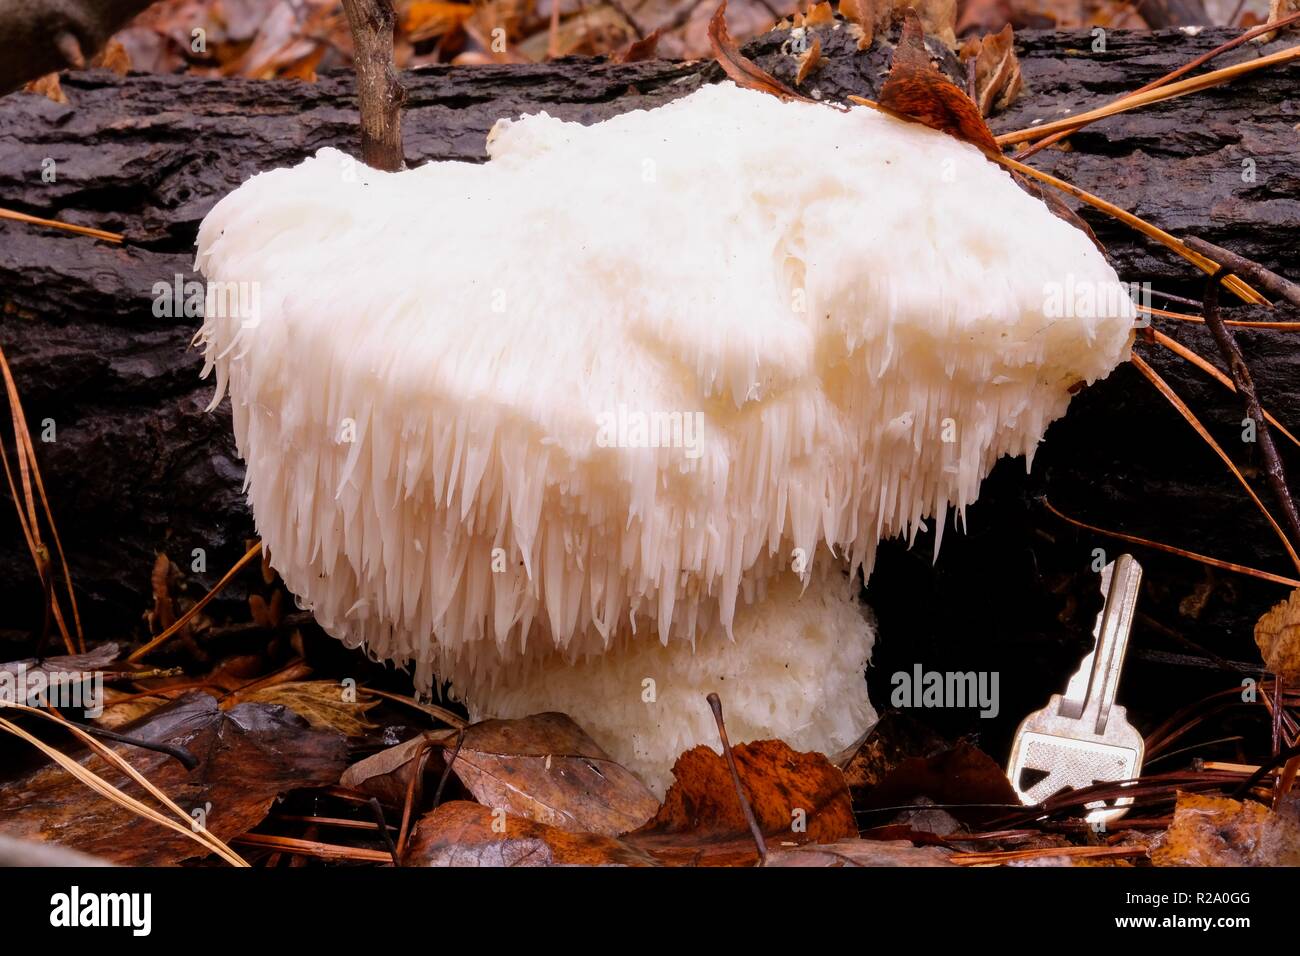 A large lion's mane mushroom at Crowder Park in Apex North Carolina. It is edible with a crab-like taste, and has medicinal benefits. Stock Photo